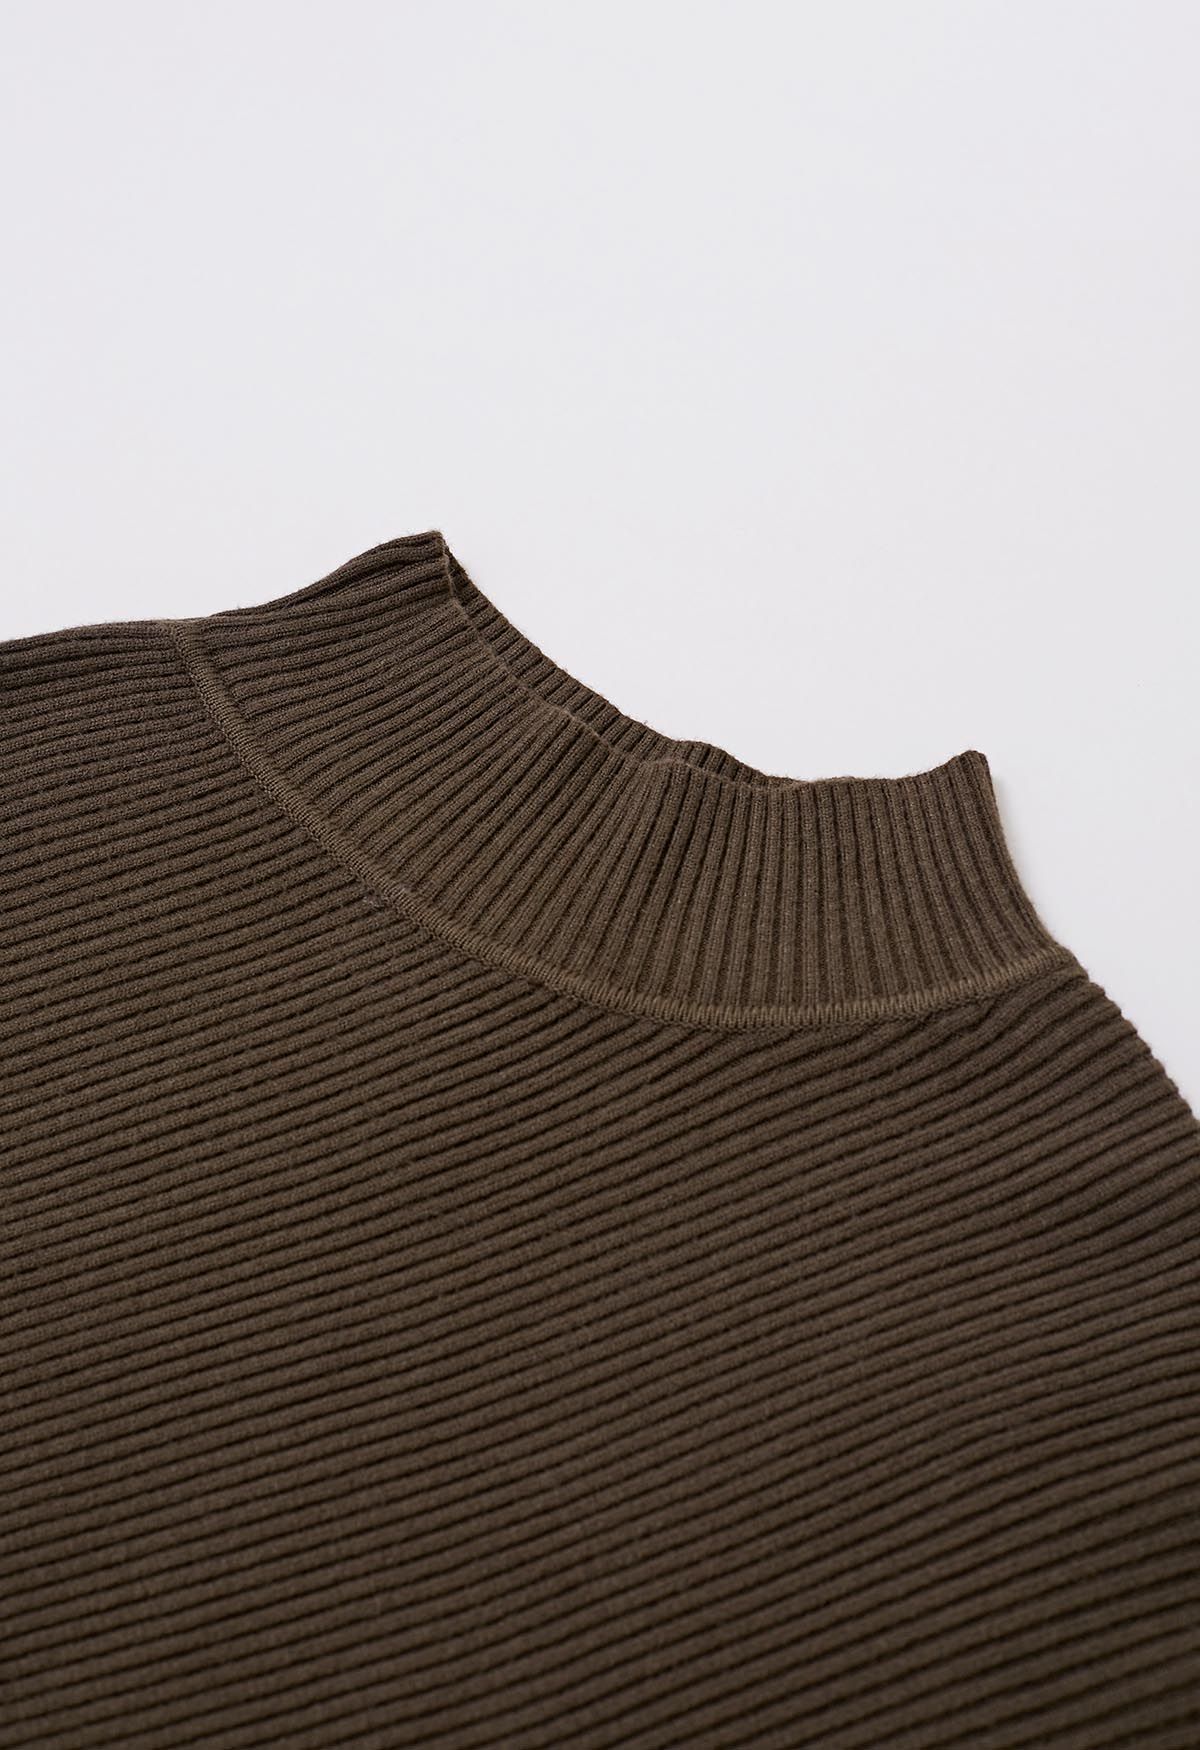 Asymmetric Batwing Sleeve Ribbed Knit Poncho in Brown